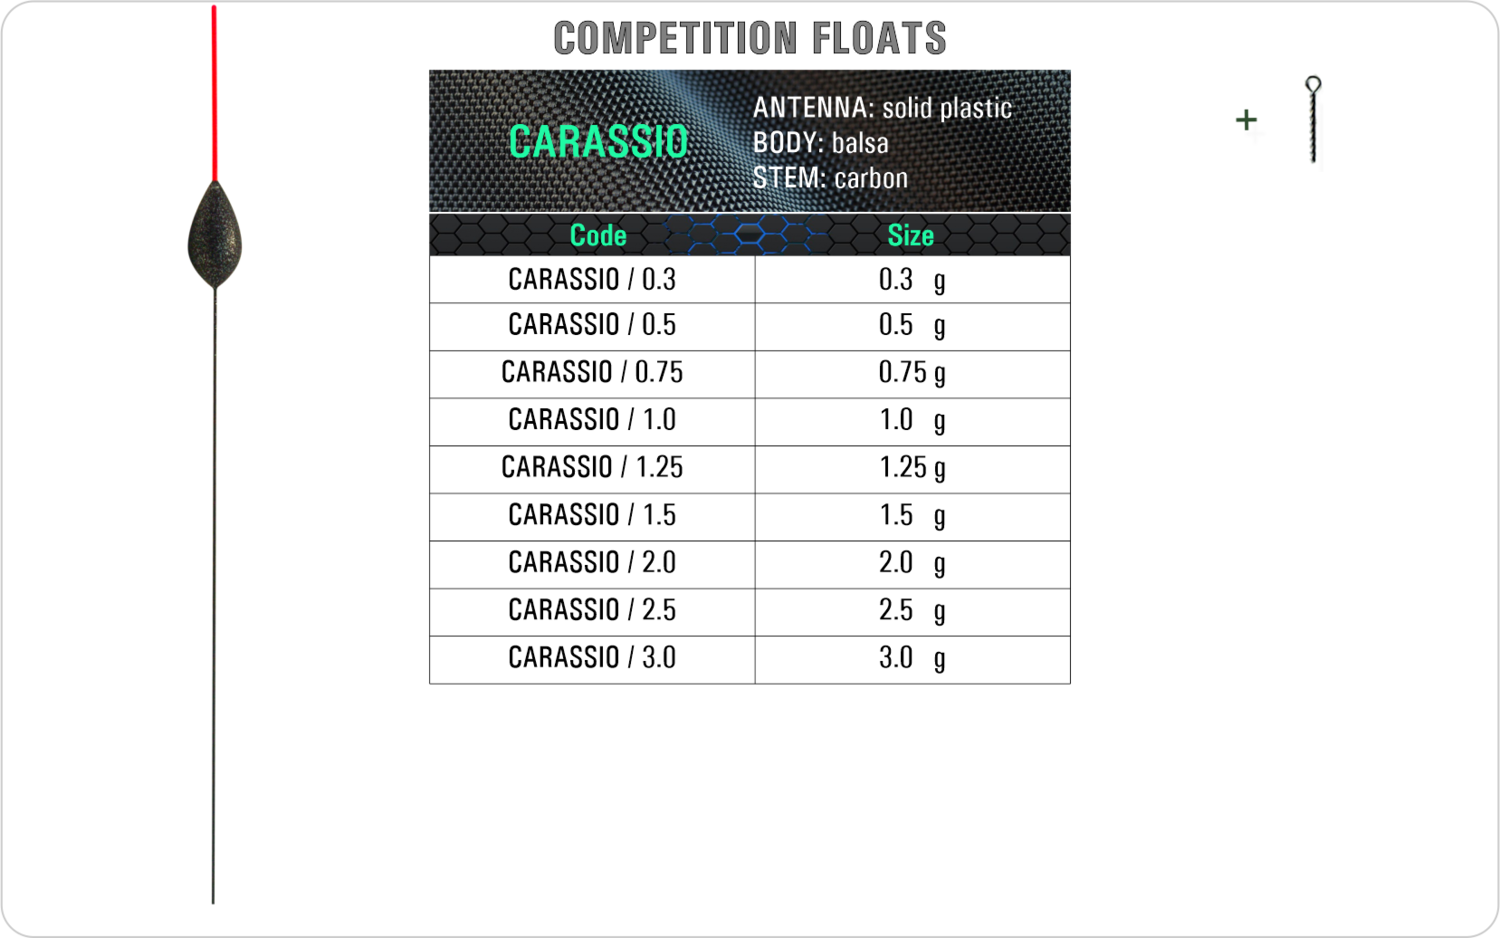 CARASSIO Competition float model and table containing an additional information about this float with different codes, sizes, types of the body, the stem and the antenna of the float.